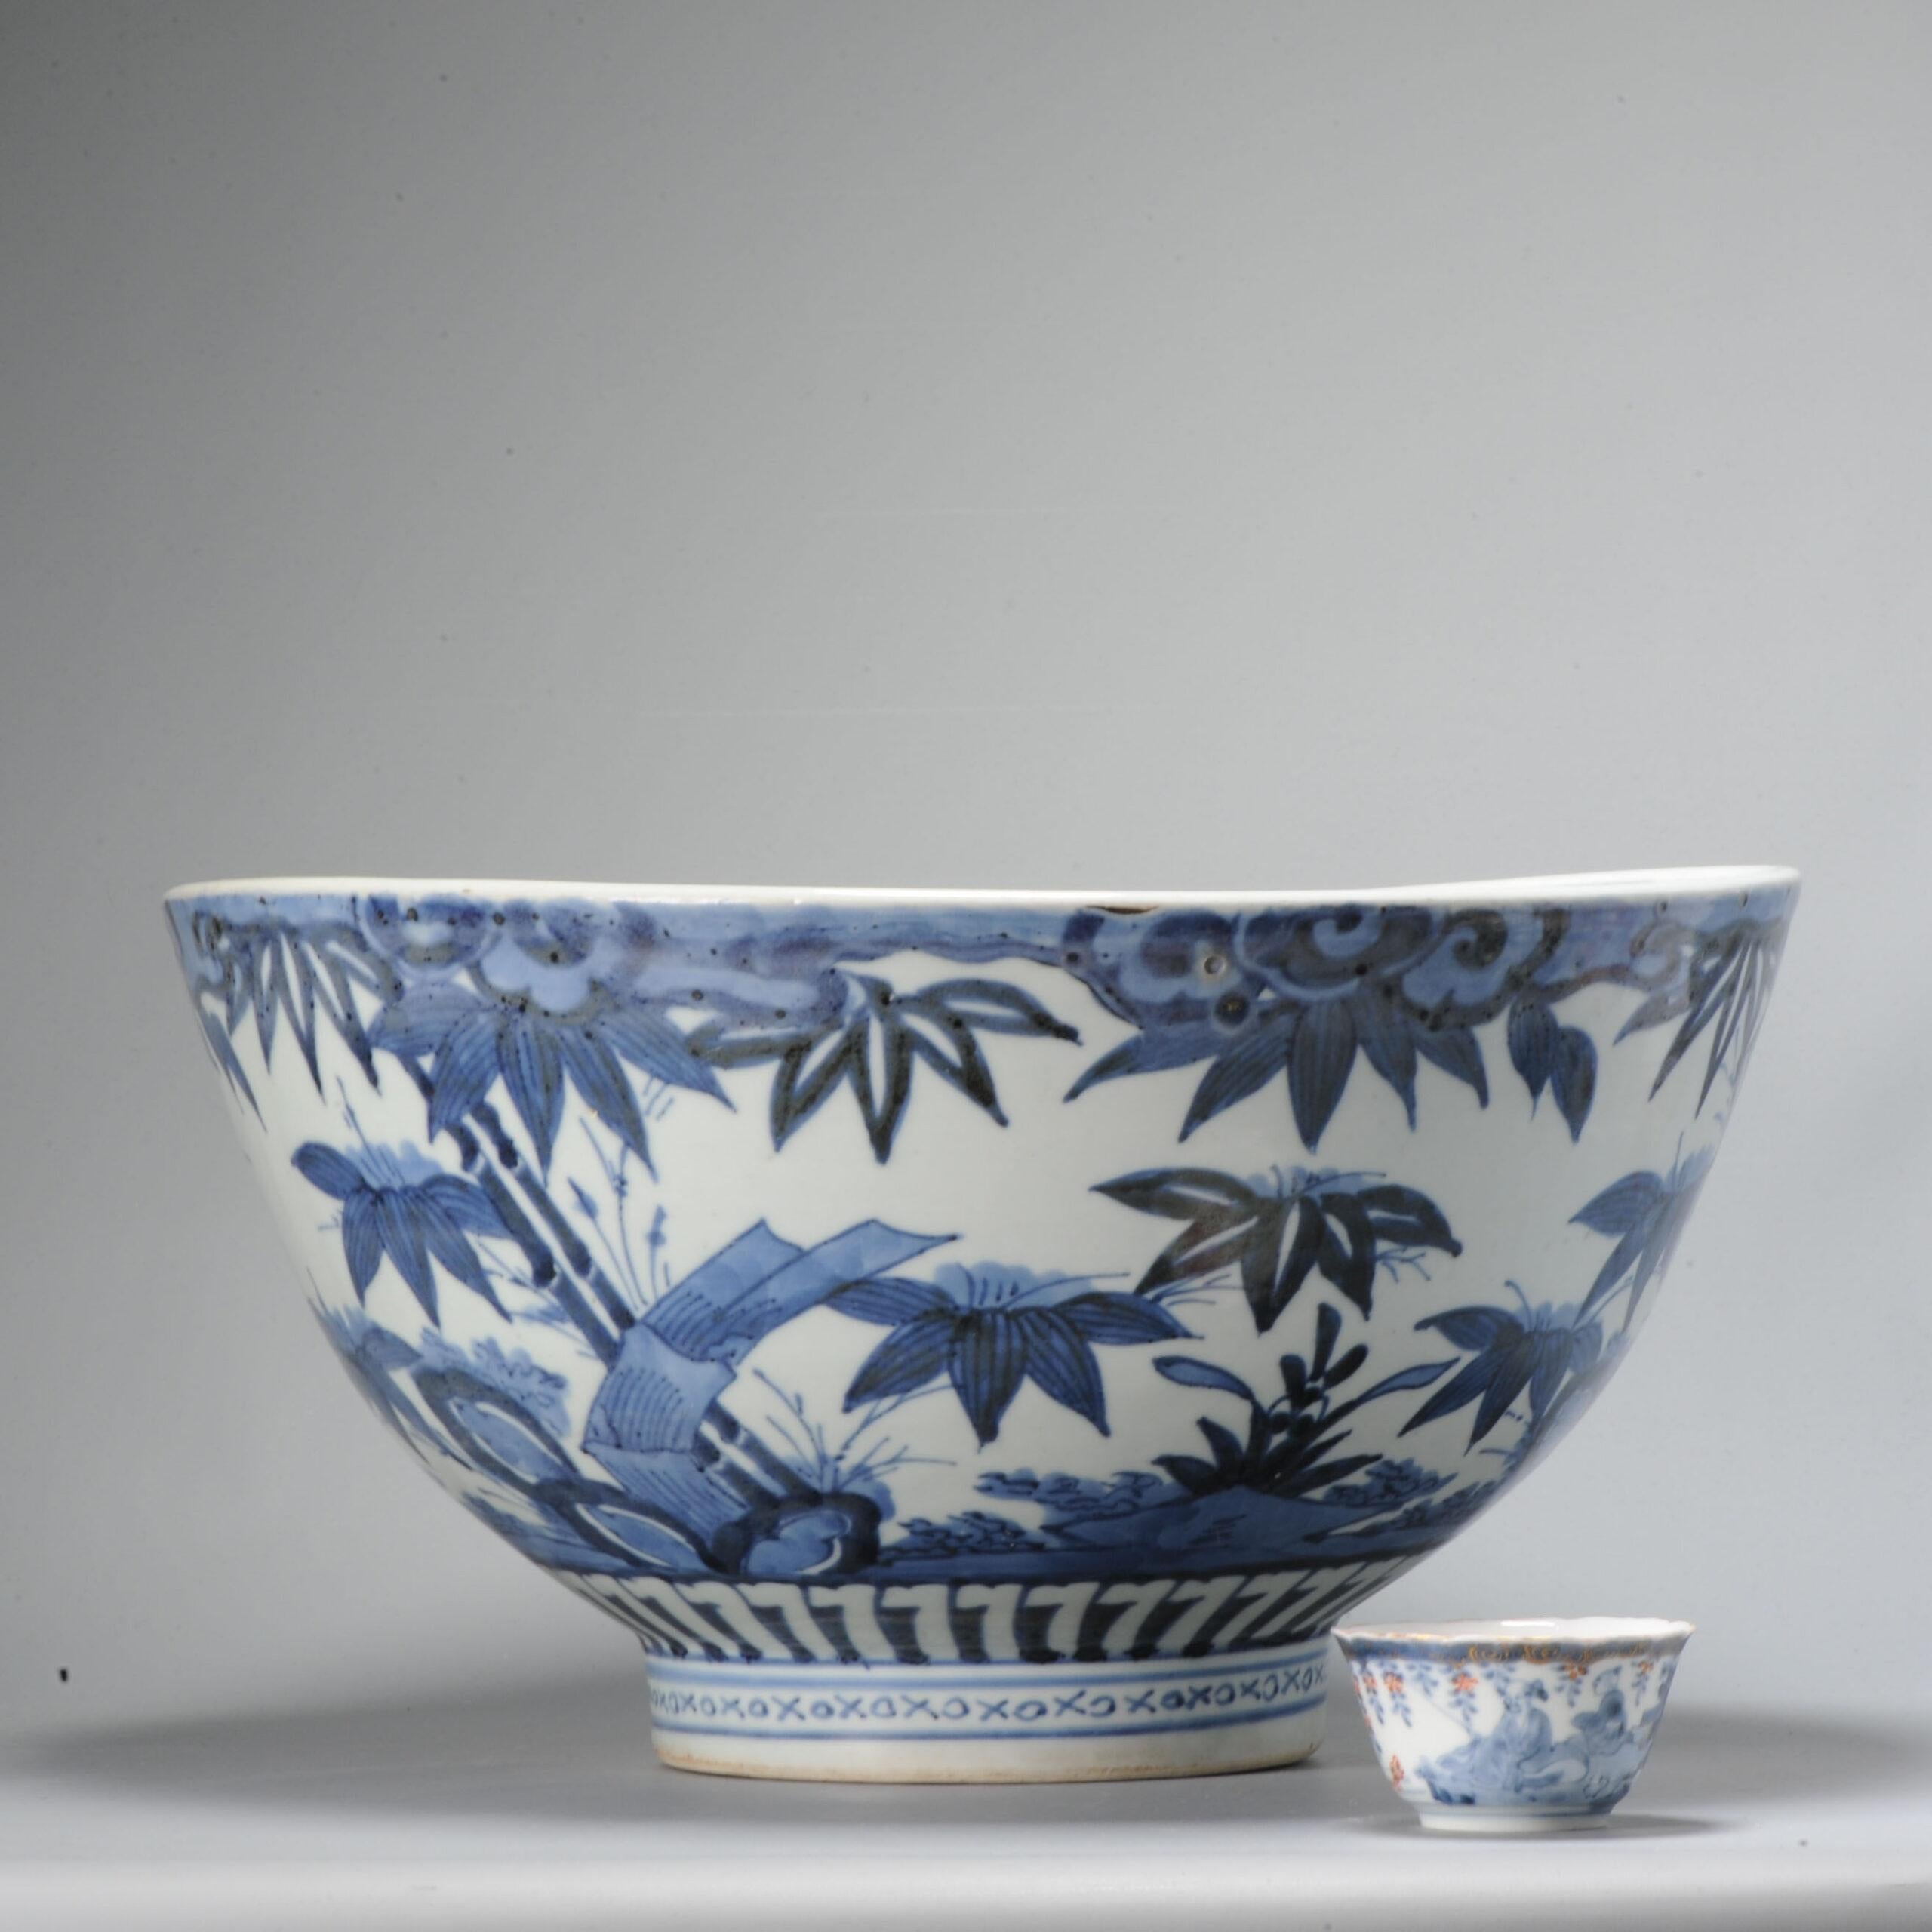 Sharing with you this very nice edo period, 1680-1700, example. With a garden floral scene in the style of Chinese Wanli period pieces.

Unmarked at base

Arita ware, also known as Arita-yaki, has its origins in 1616, when a Korean farmer, Yi